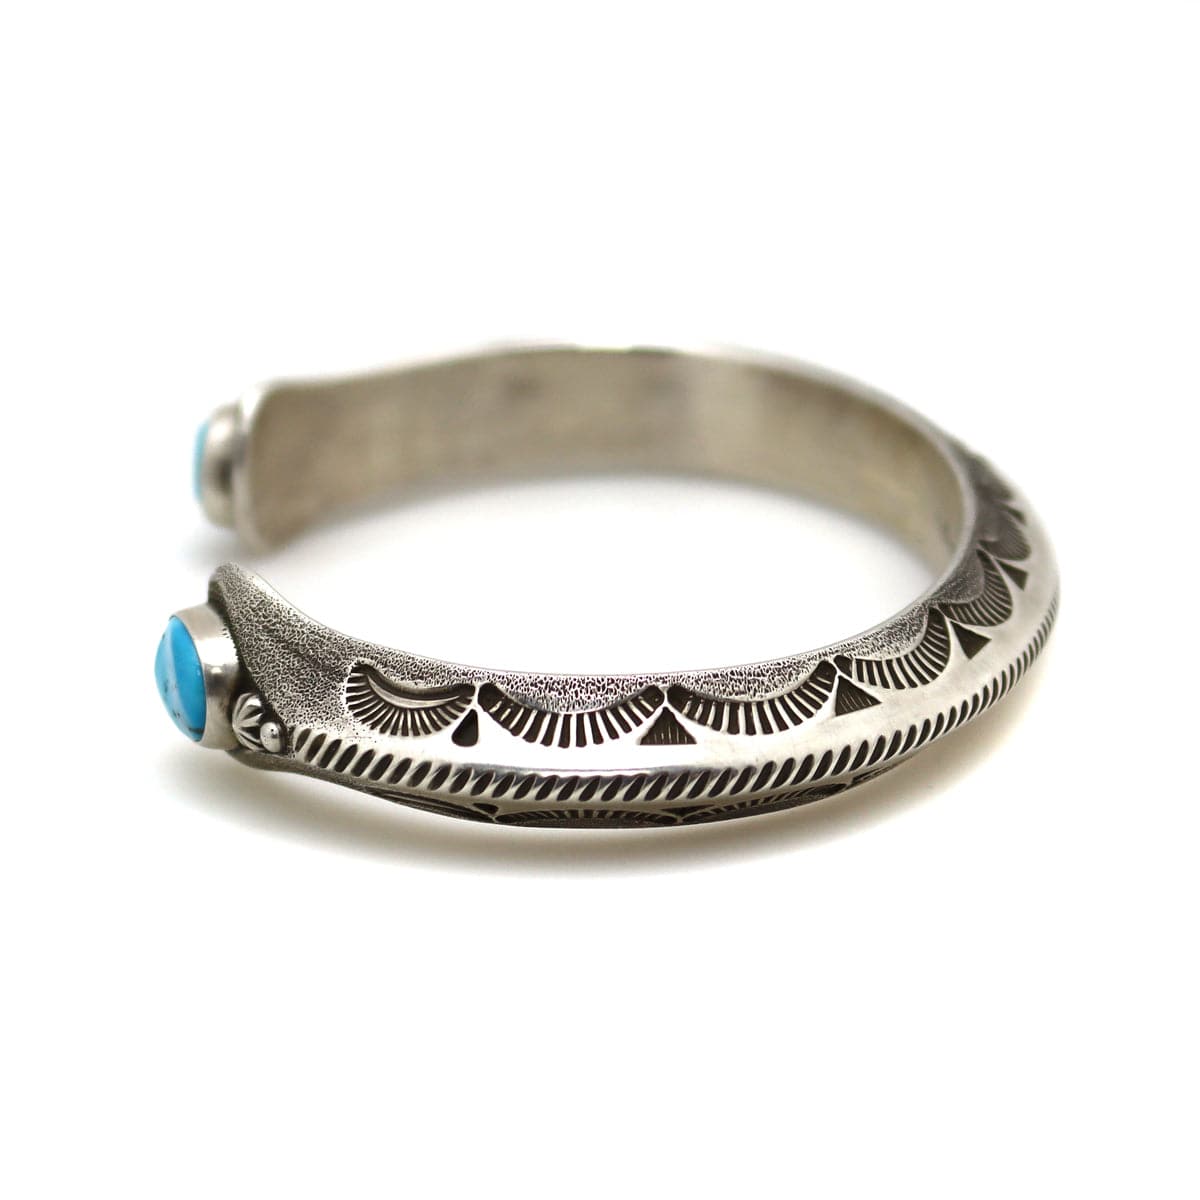 Kee Nataani - Navajo Contemporary Kingman Turquoise and Silver Bracelet with Stamped Design, size 9.25 (J13359)3